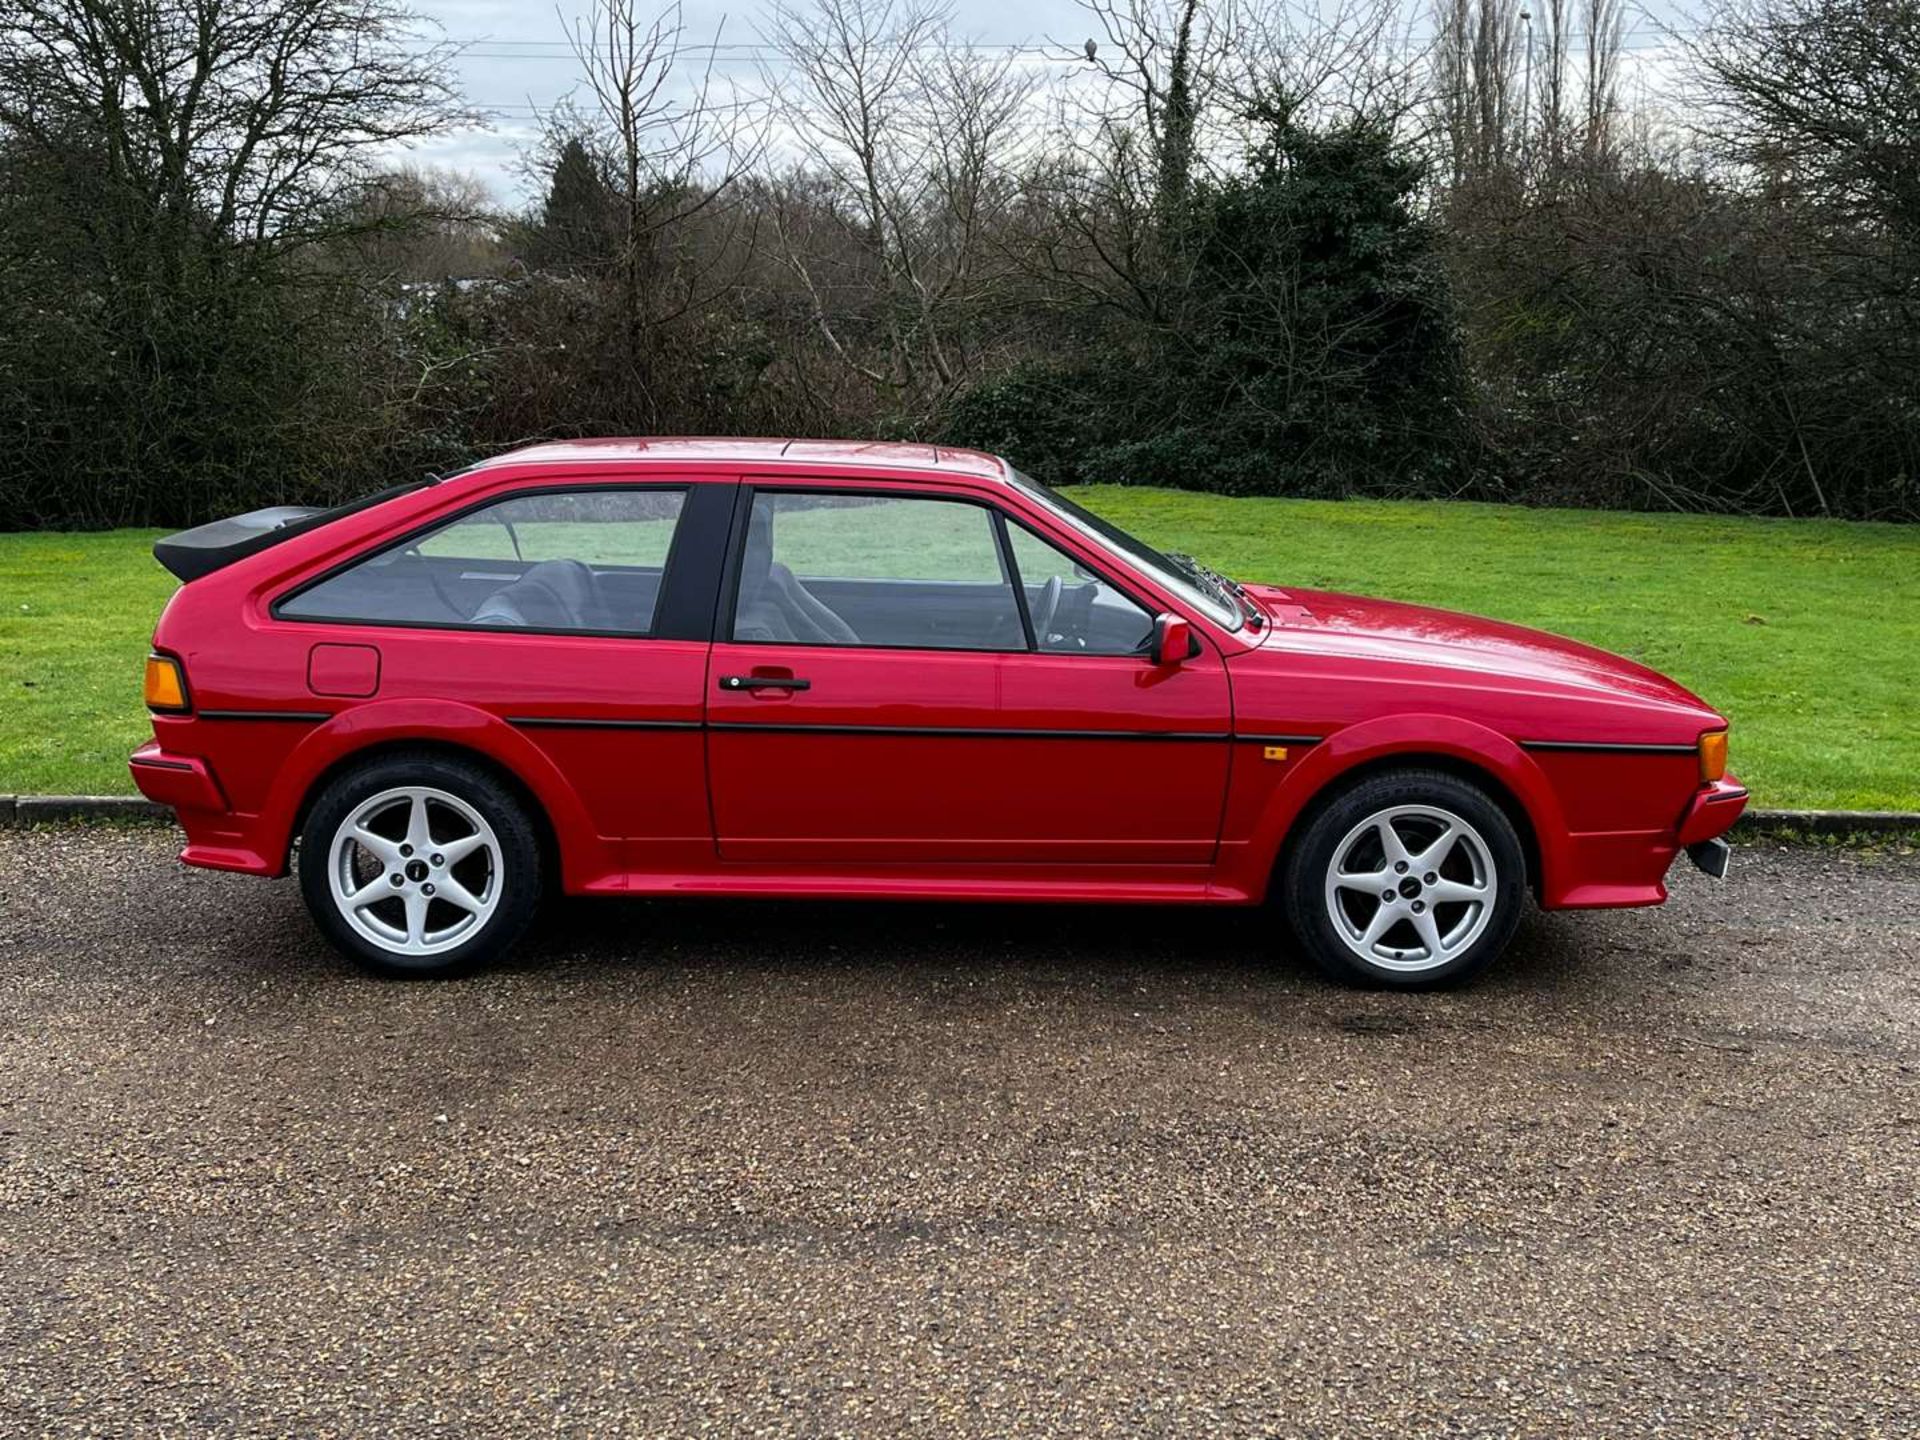 1990 VW SCIROCCO 1.8 GT - Image 8 of 29